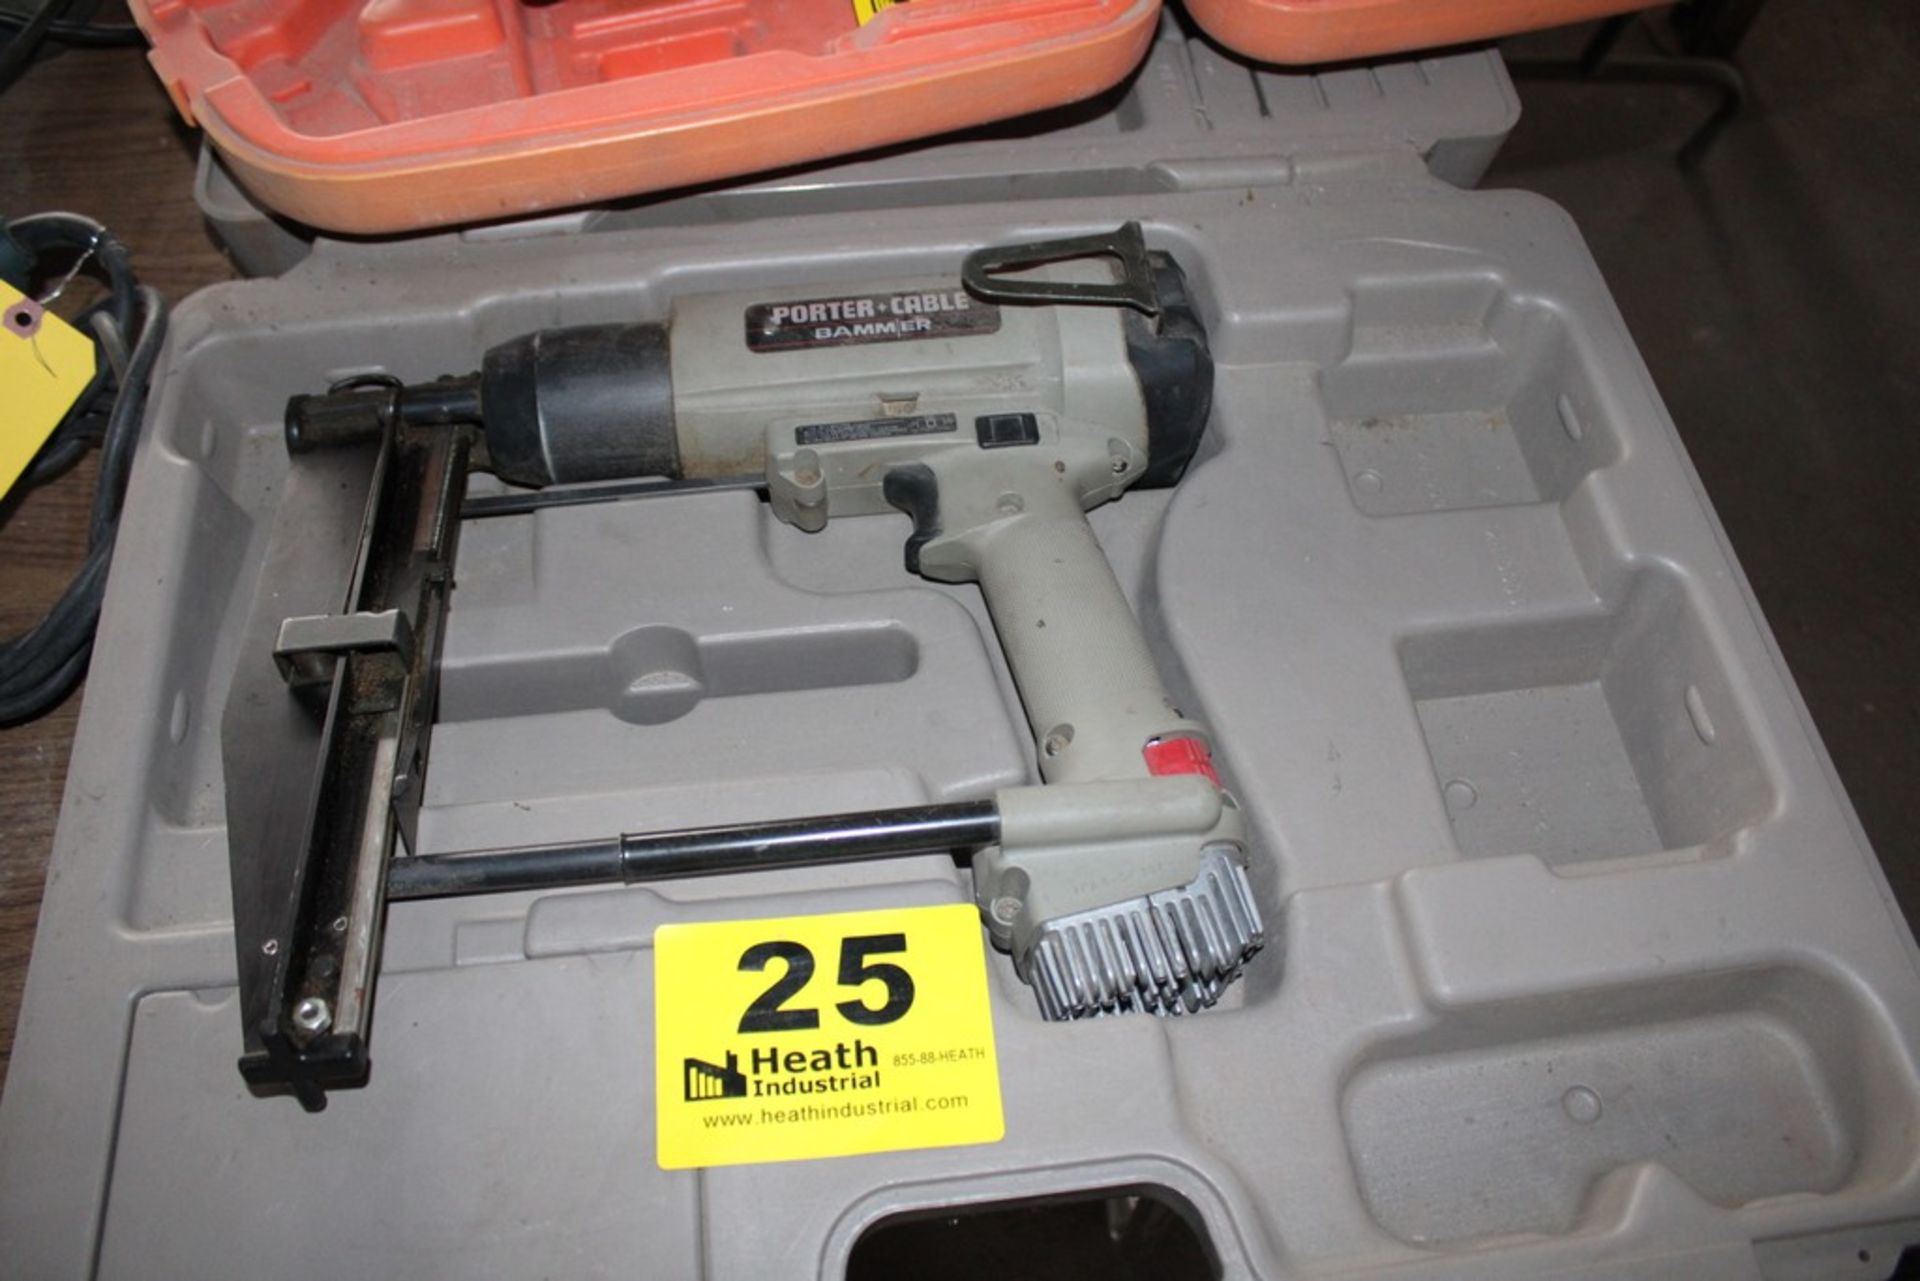 PORTER-CABLE "BAMMER" GAS POWERED NAIL GUN WITH CASE